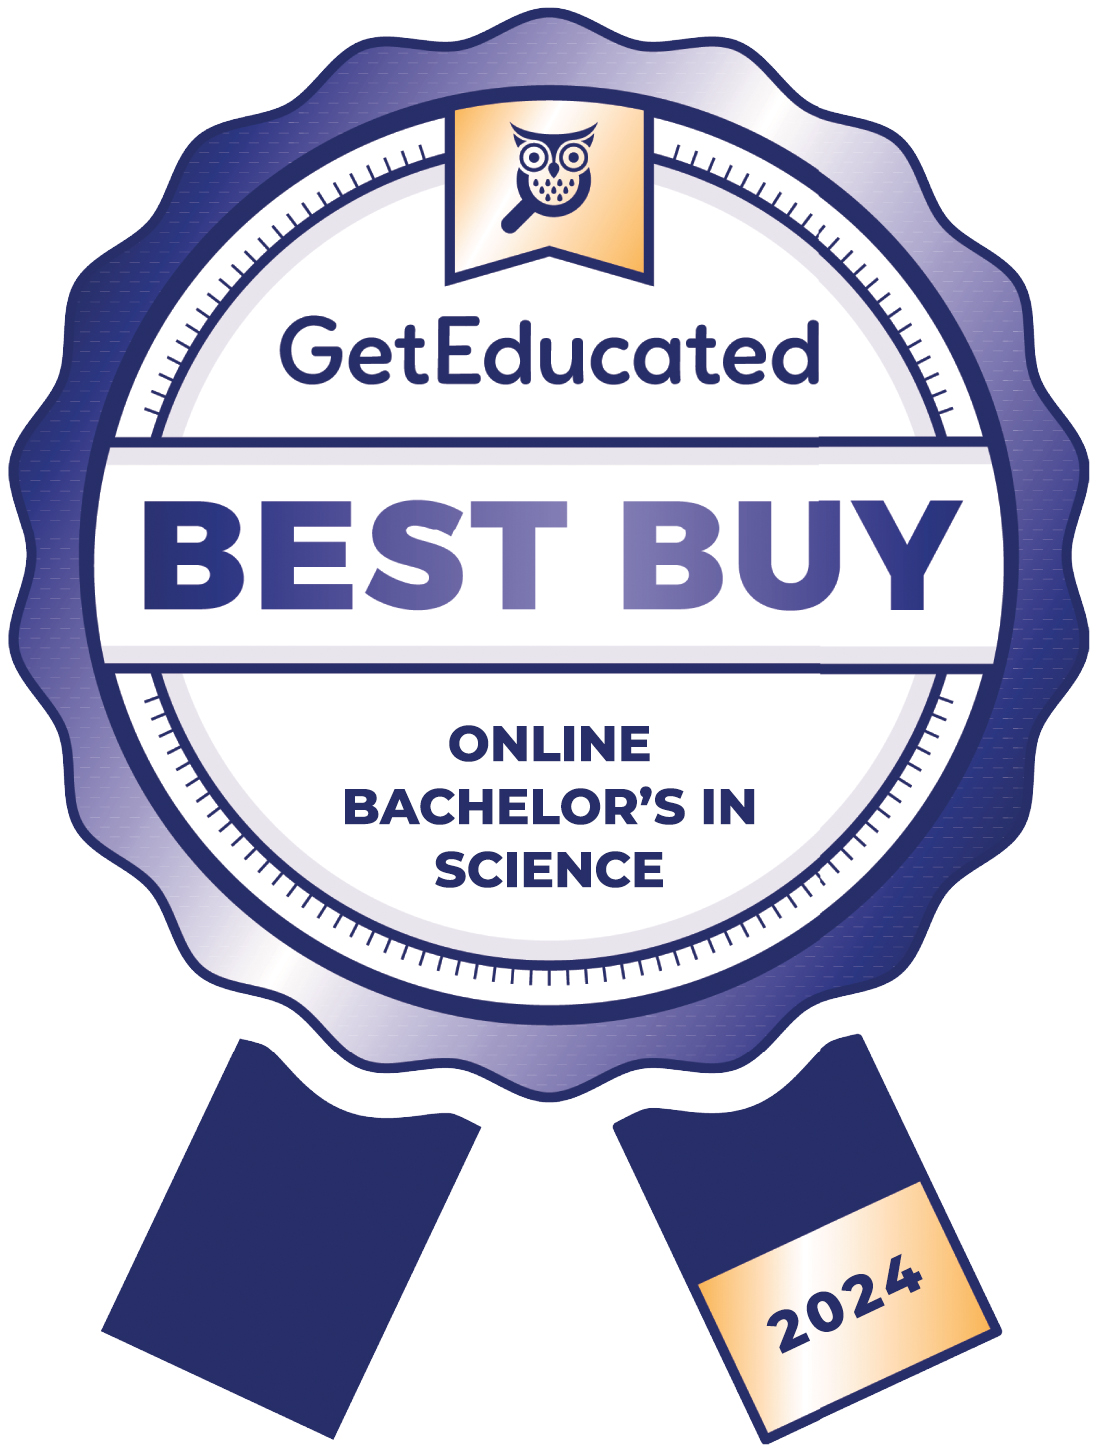 Rankings for the cheapest online bachelor's in science